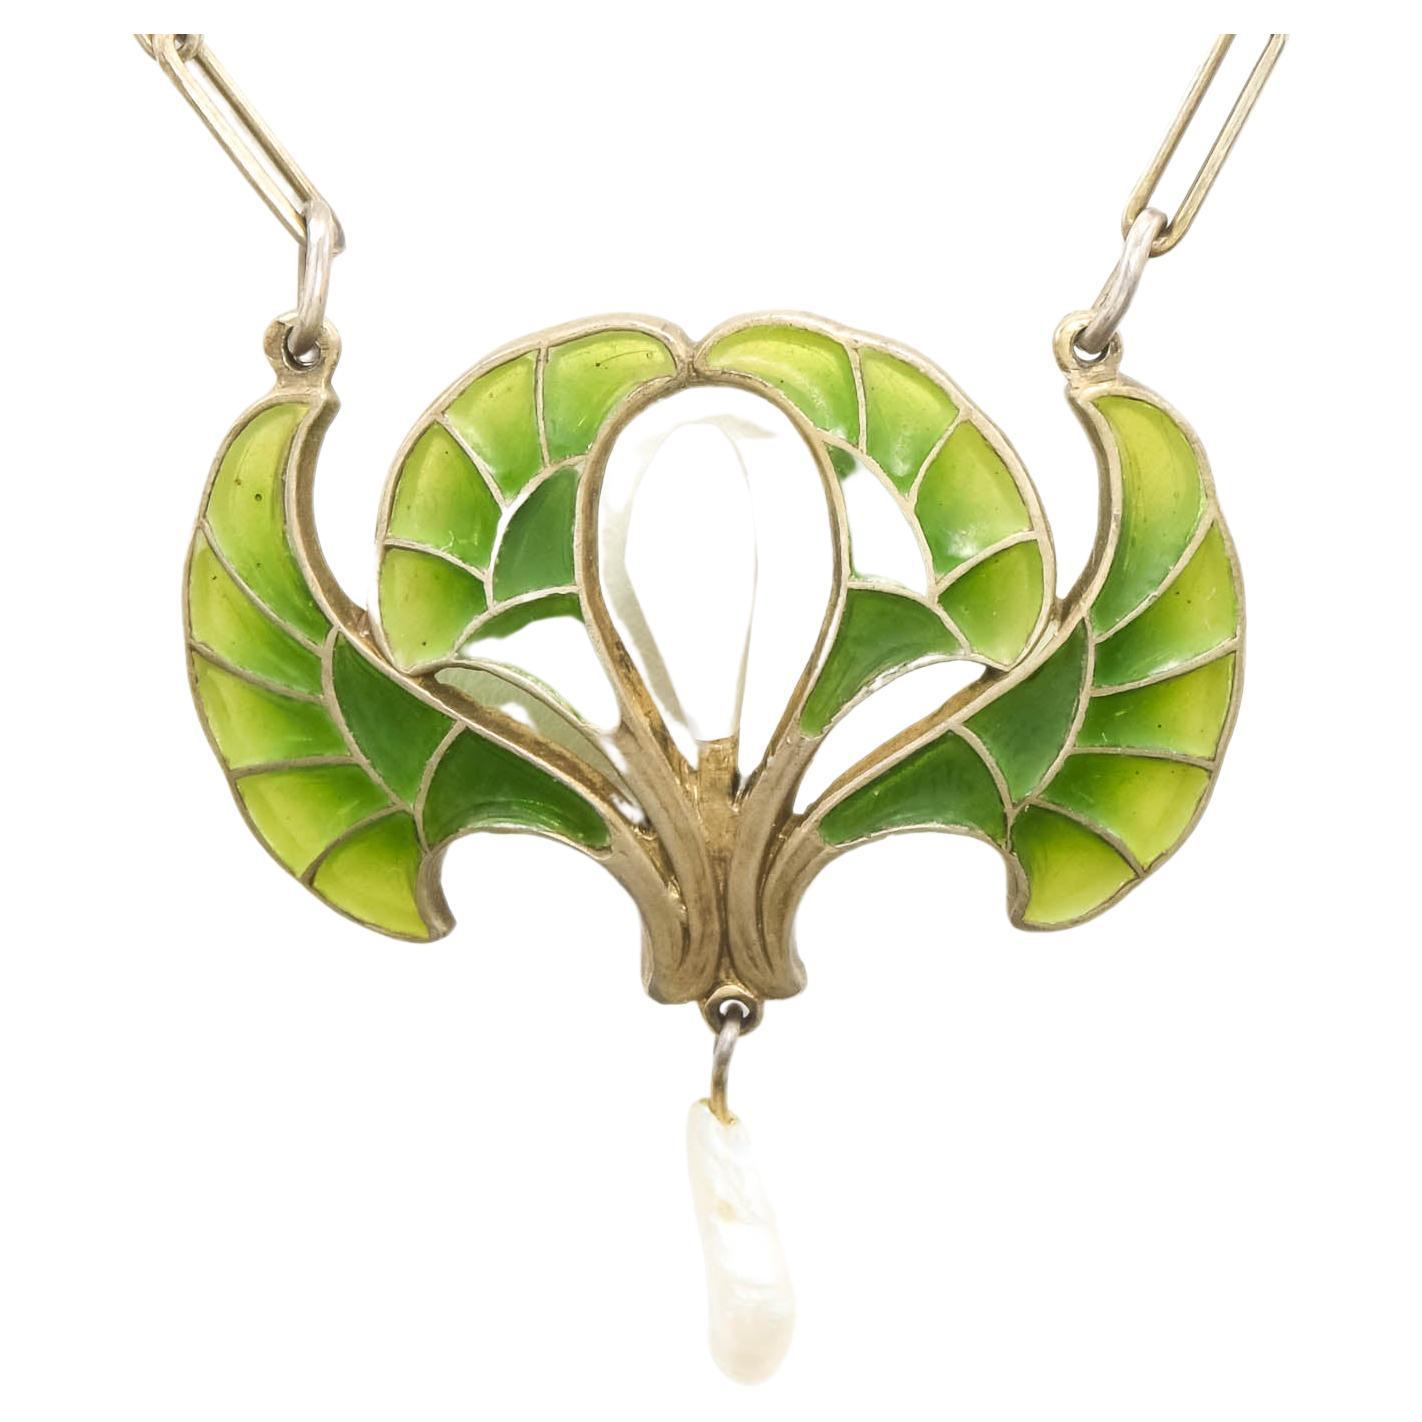 Exquisite in both design and color, this marvelous Jugenstil (Art Nouveau) necklace was made in Pforzheim, Germany by Heinrich Levinger, who founded his business in 1878.

Finely made of .900 silver (just under our US .925 sterling standard of